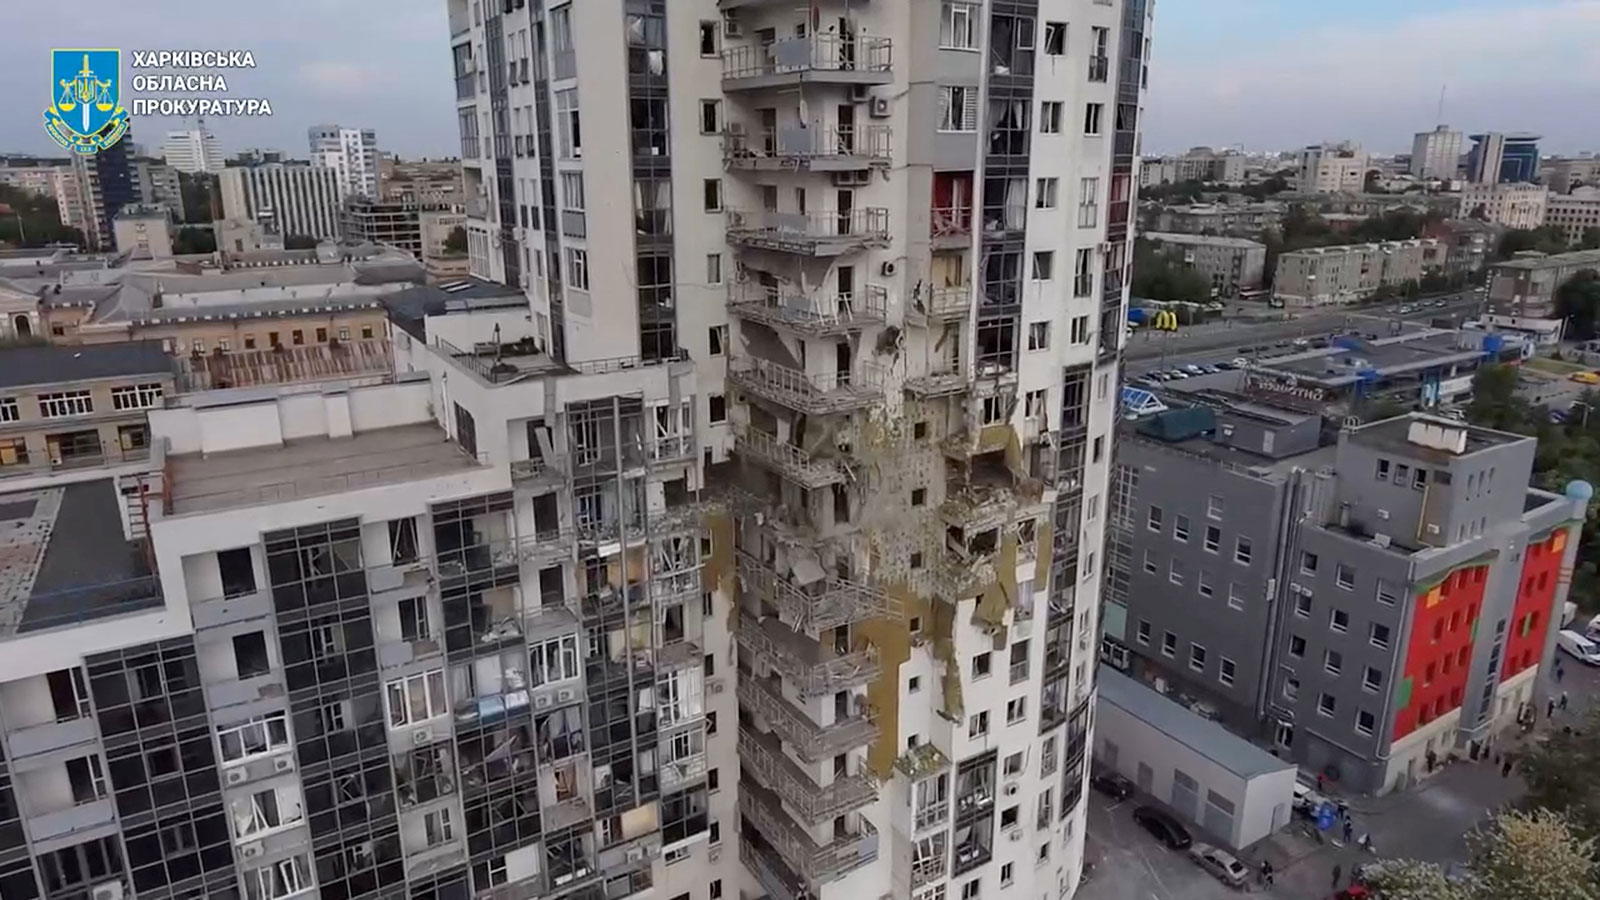 A view of a damaged residential building in the aftermath of a Russian strike in Kharkiv, Ukraine, on Tuesday, May 14.